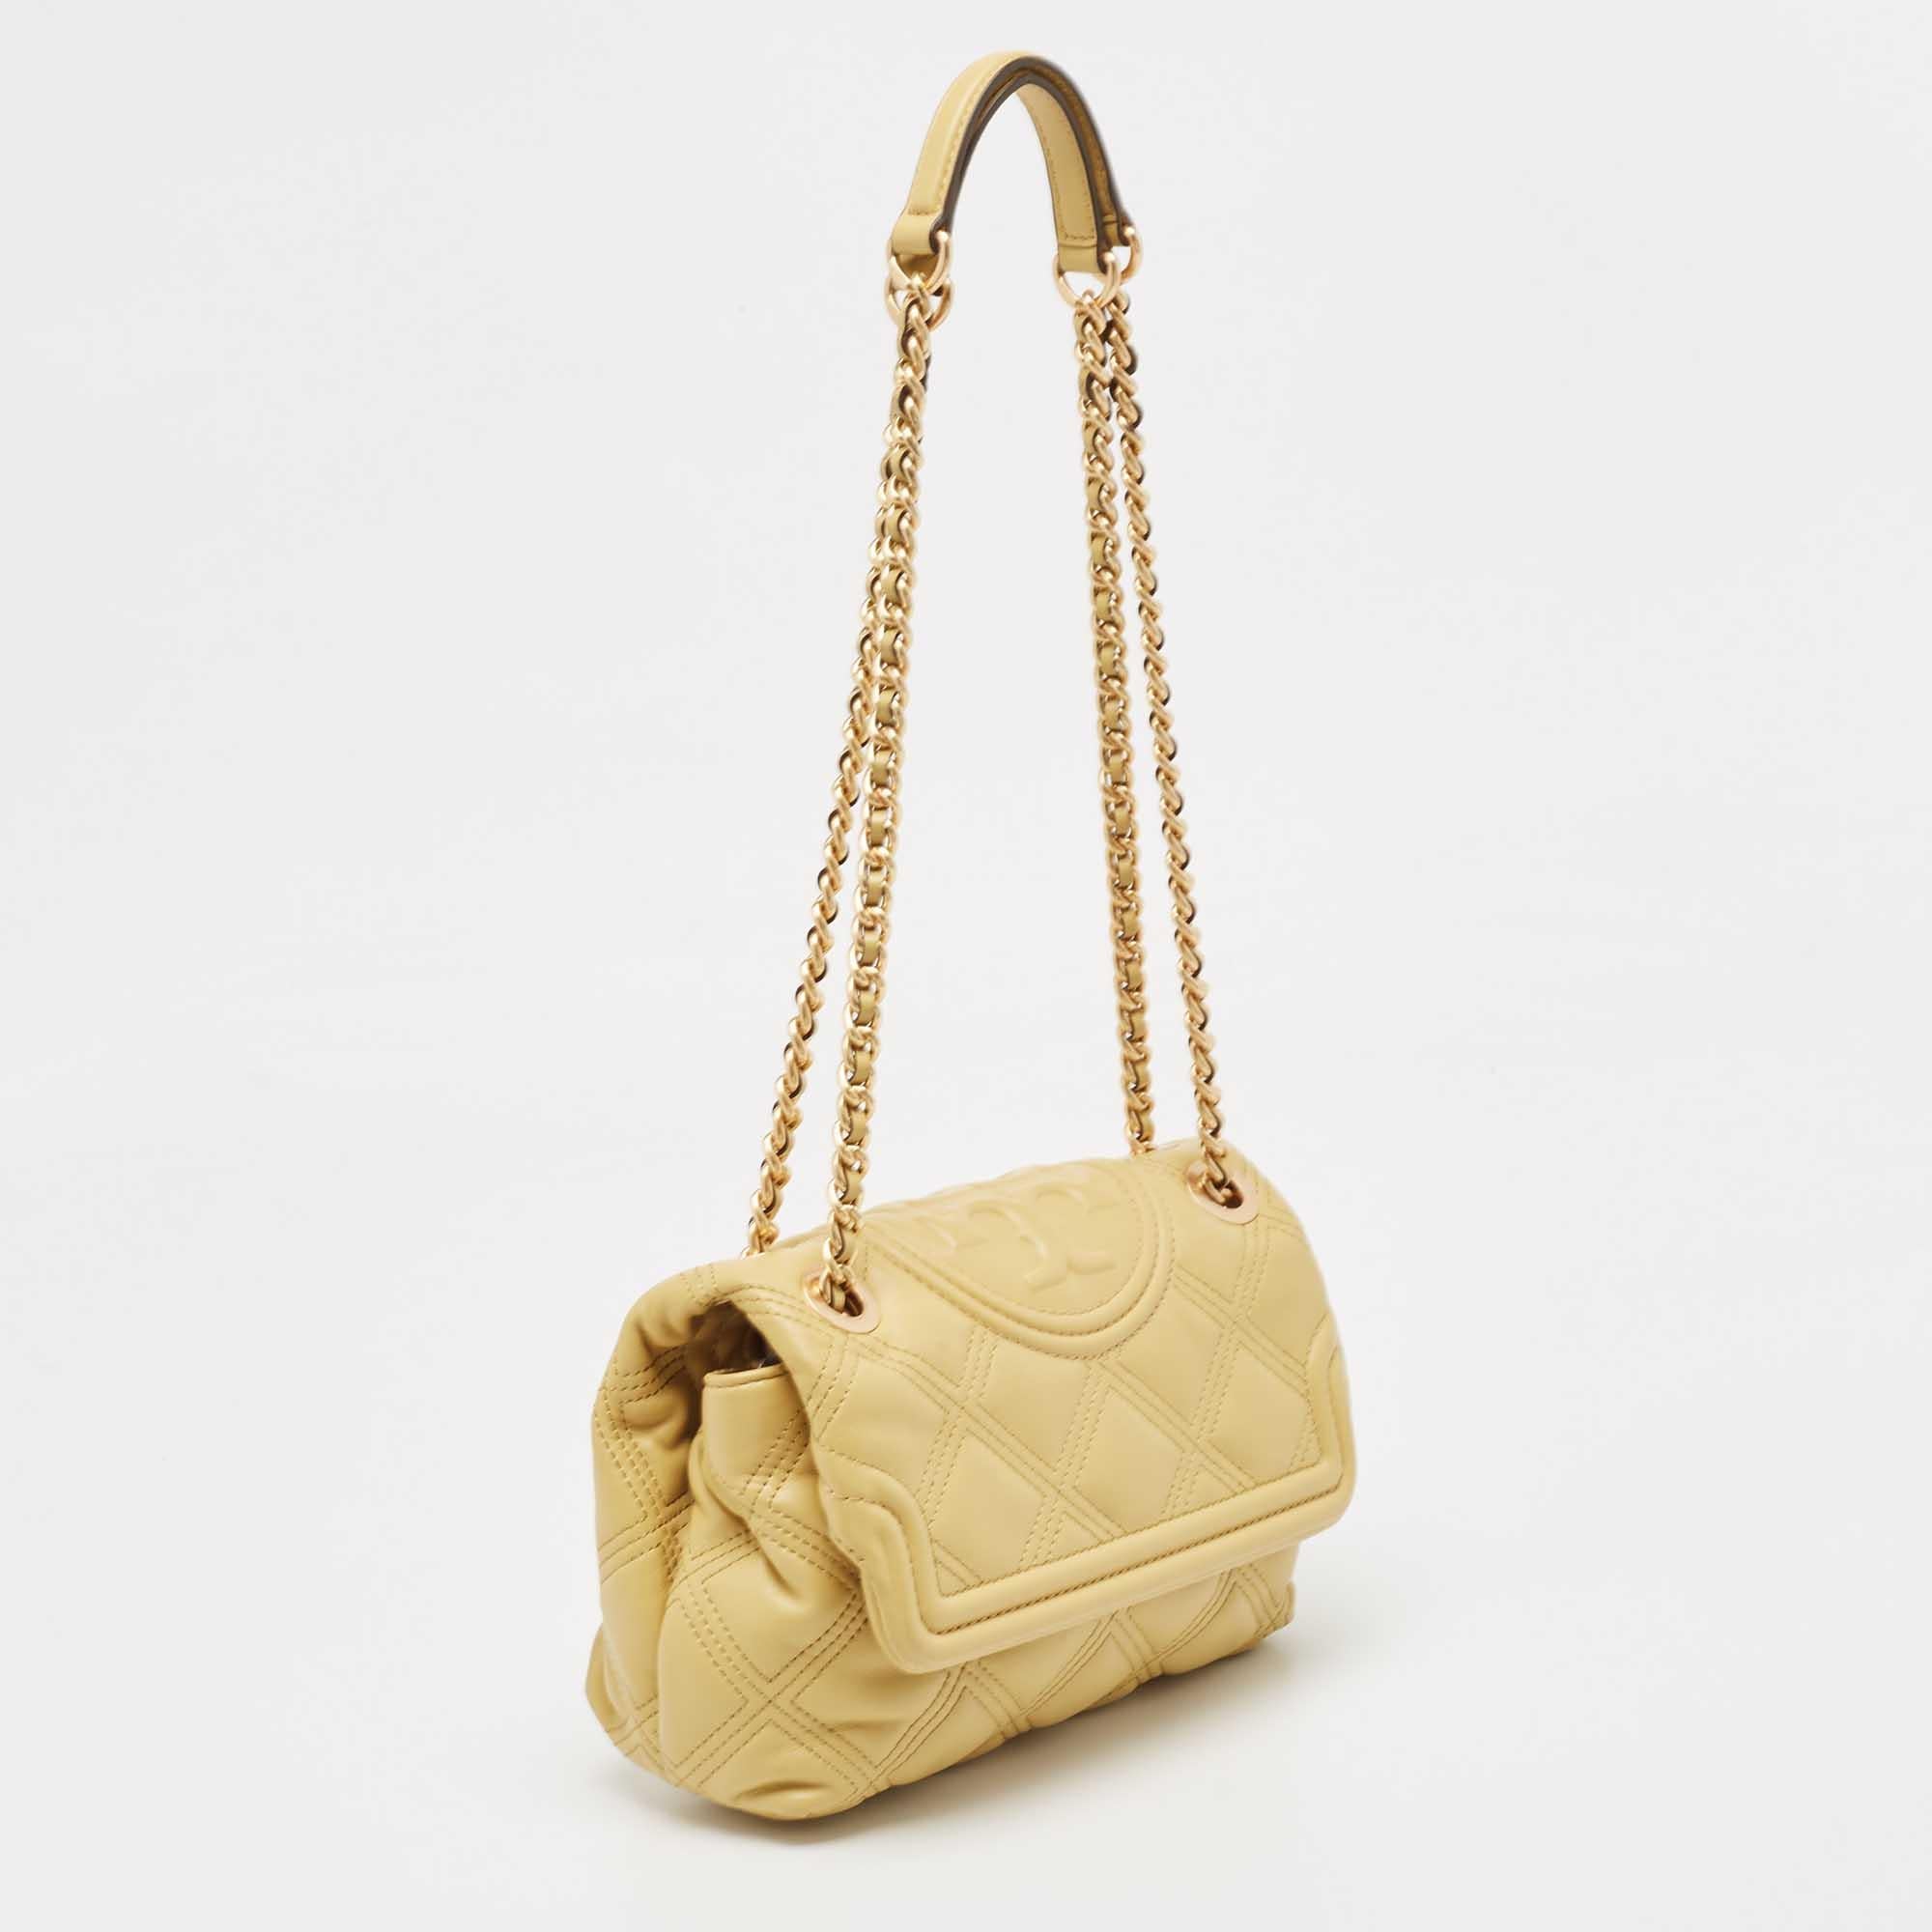 Tory Burch Yellow Leather Fleming Shoulder Bag For Sale 1